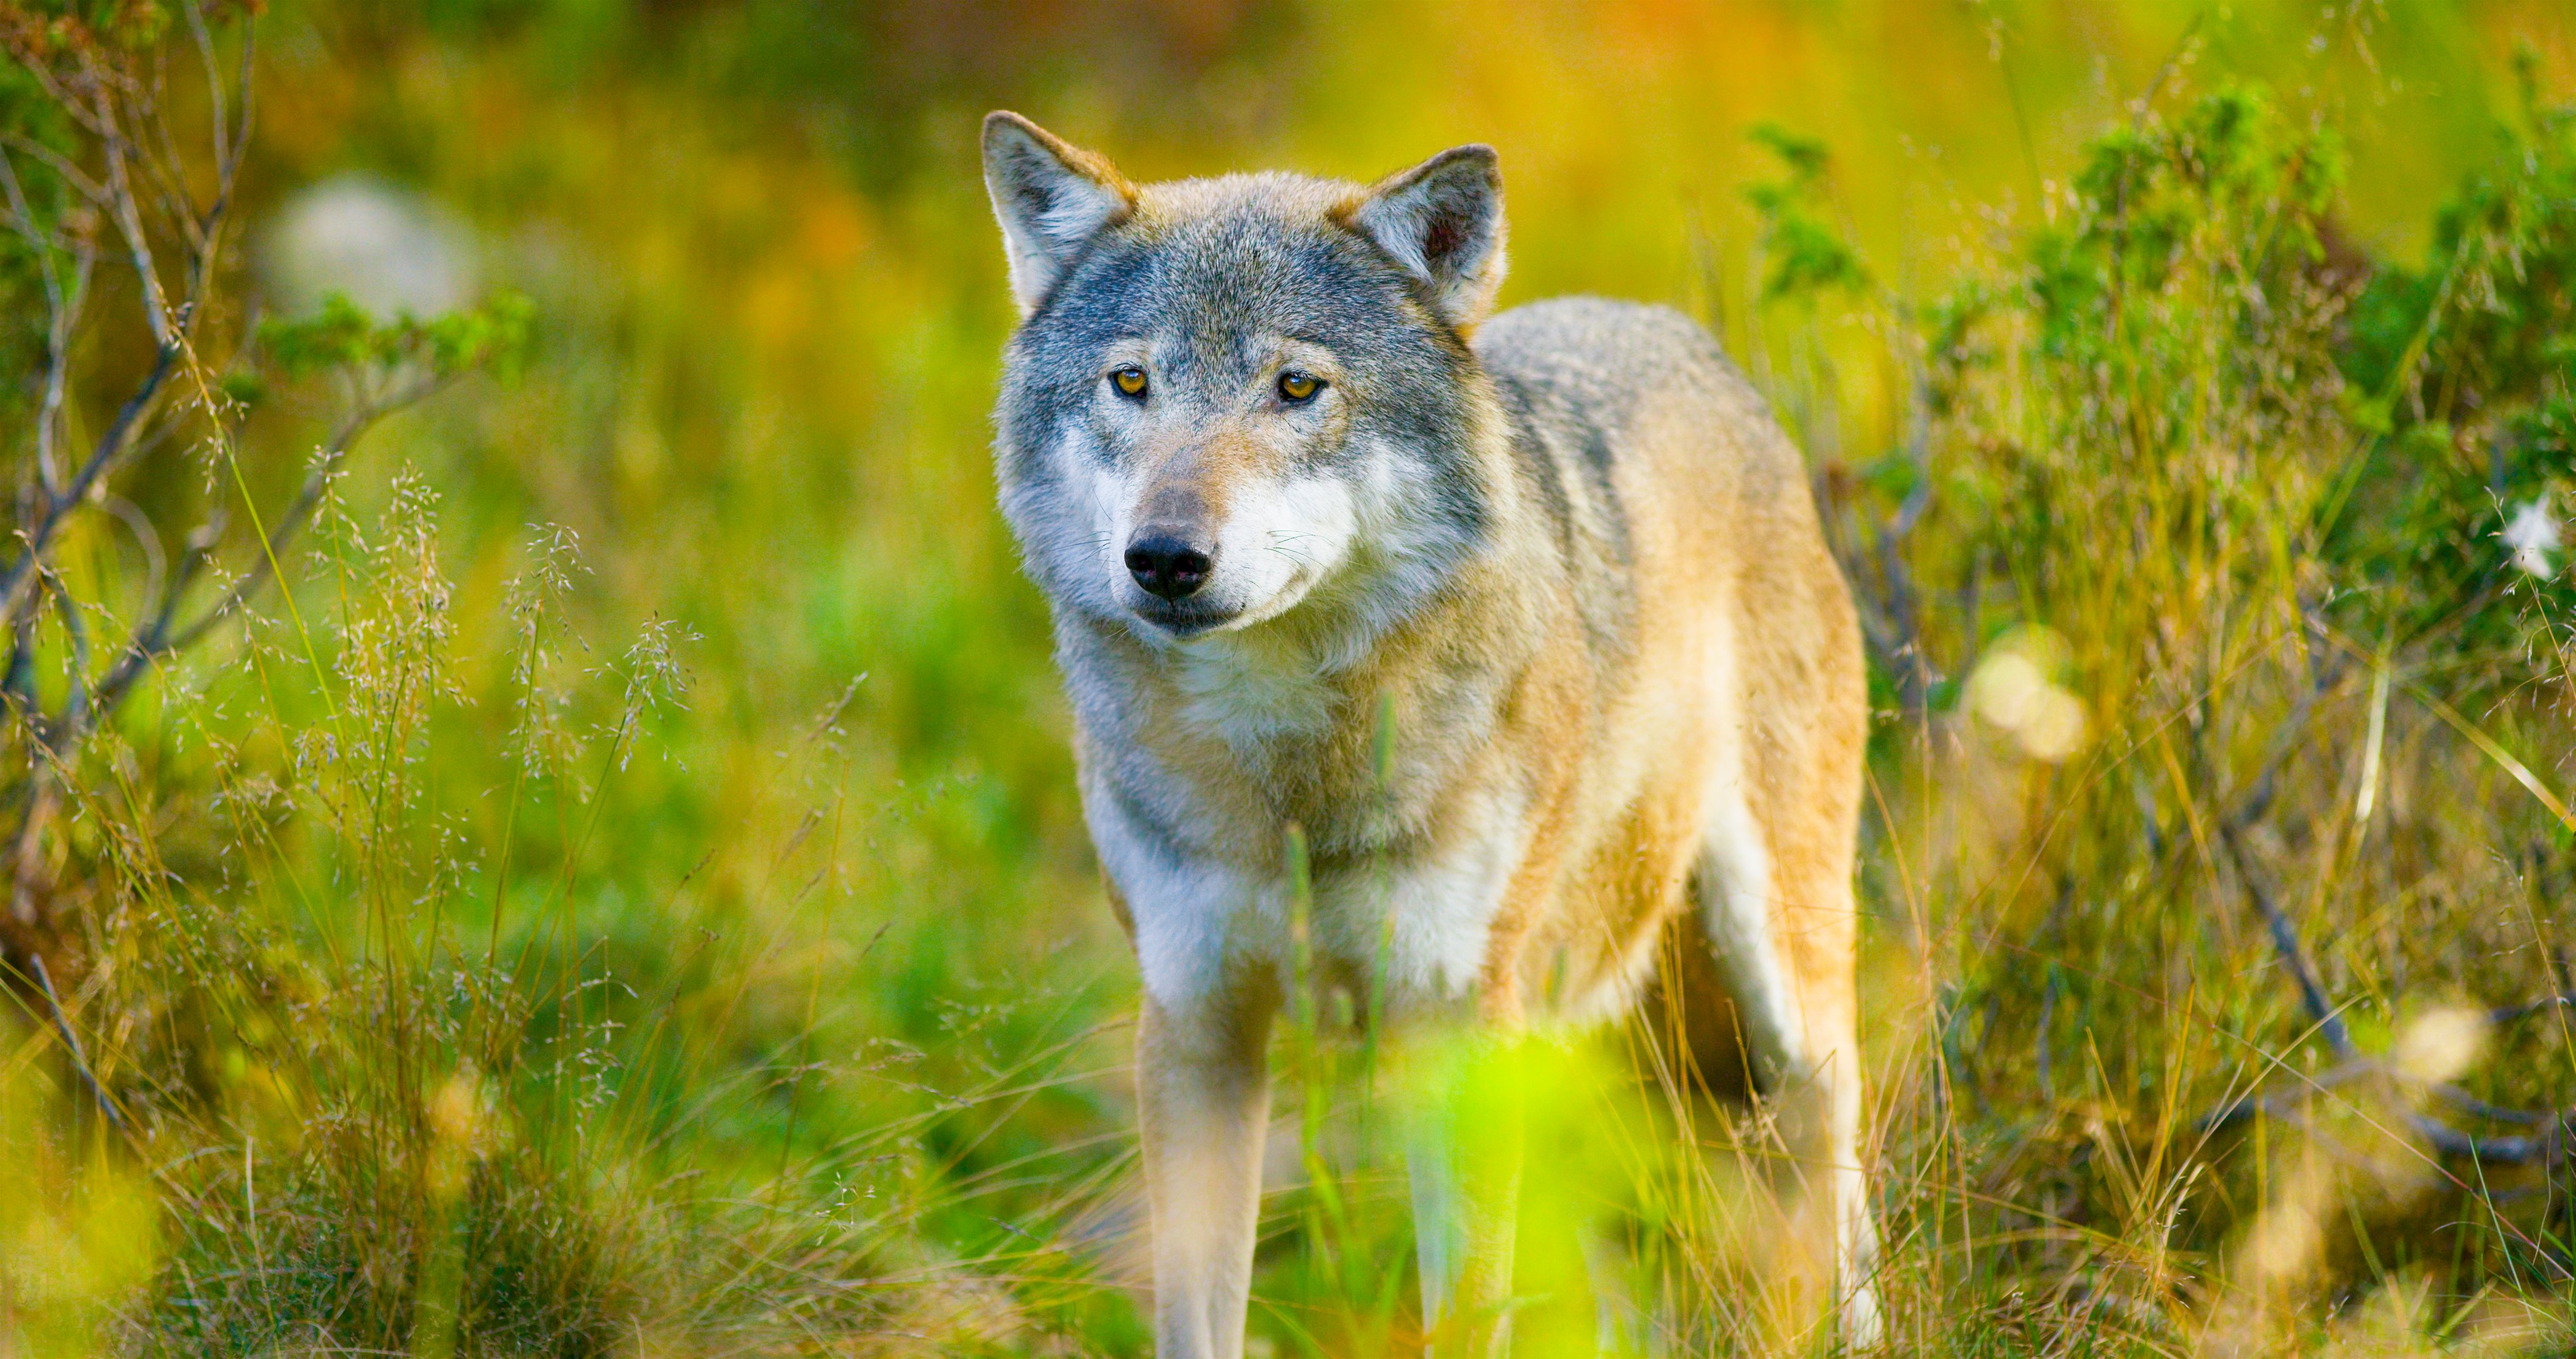 large-male-grey-wolf-in-autumn-colored-field-in-th-2022-10-07-03-36-18-utc.jpg